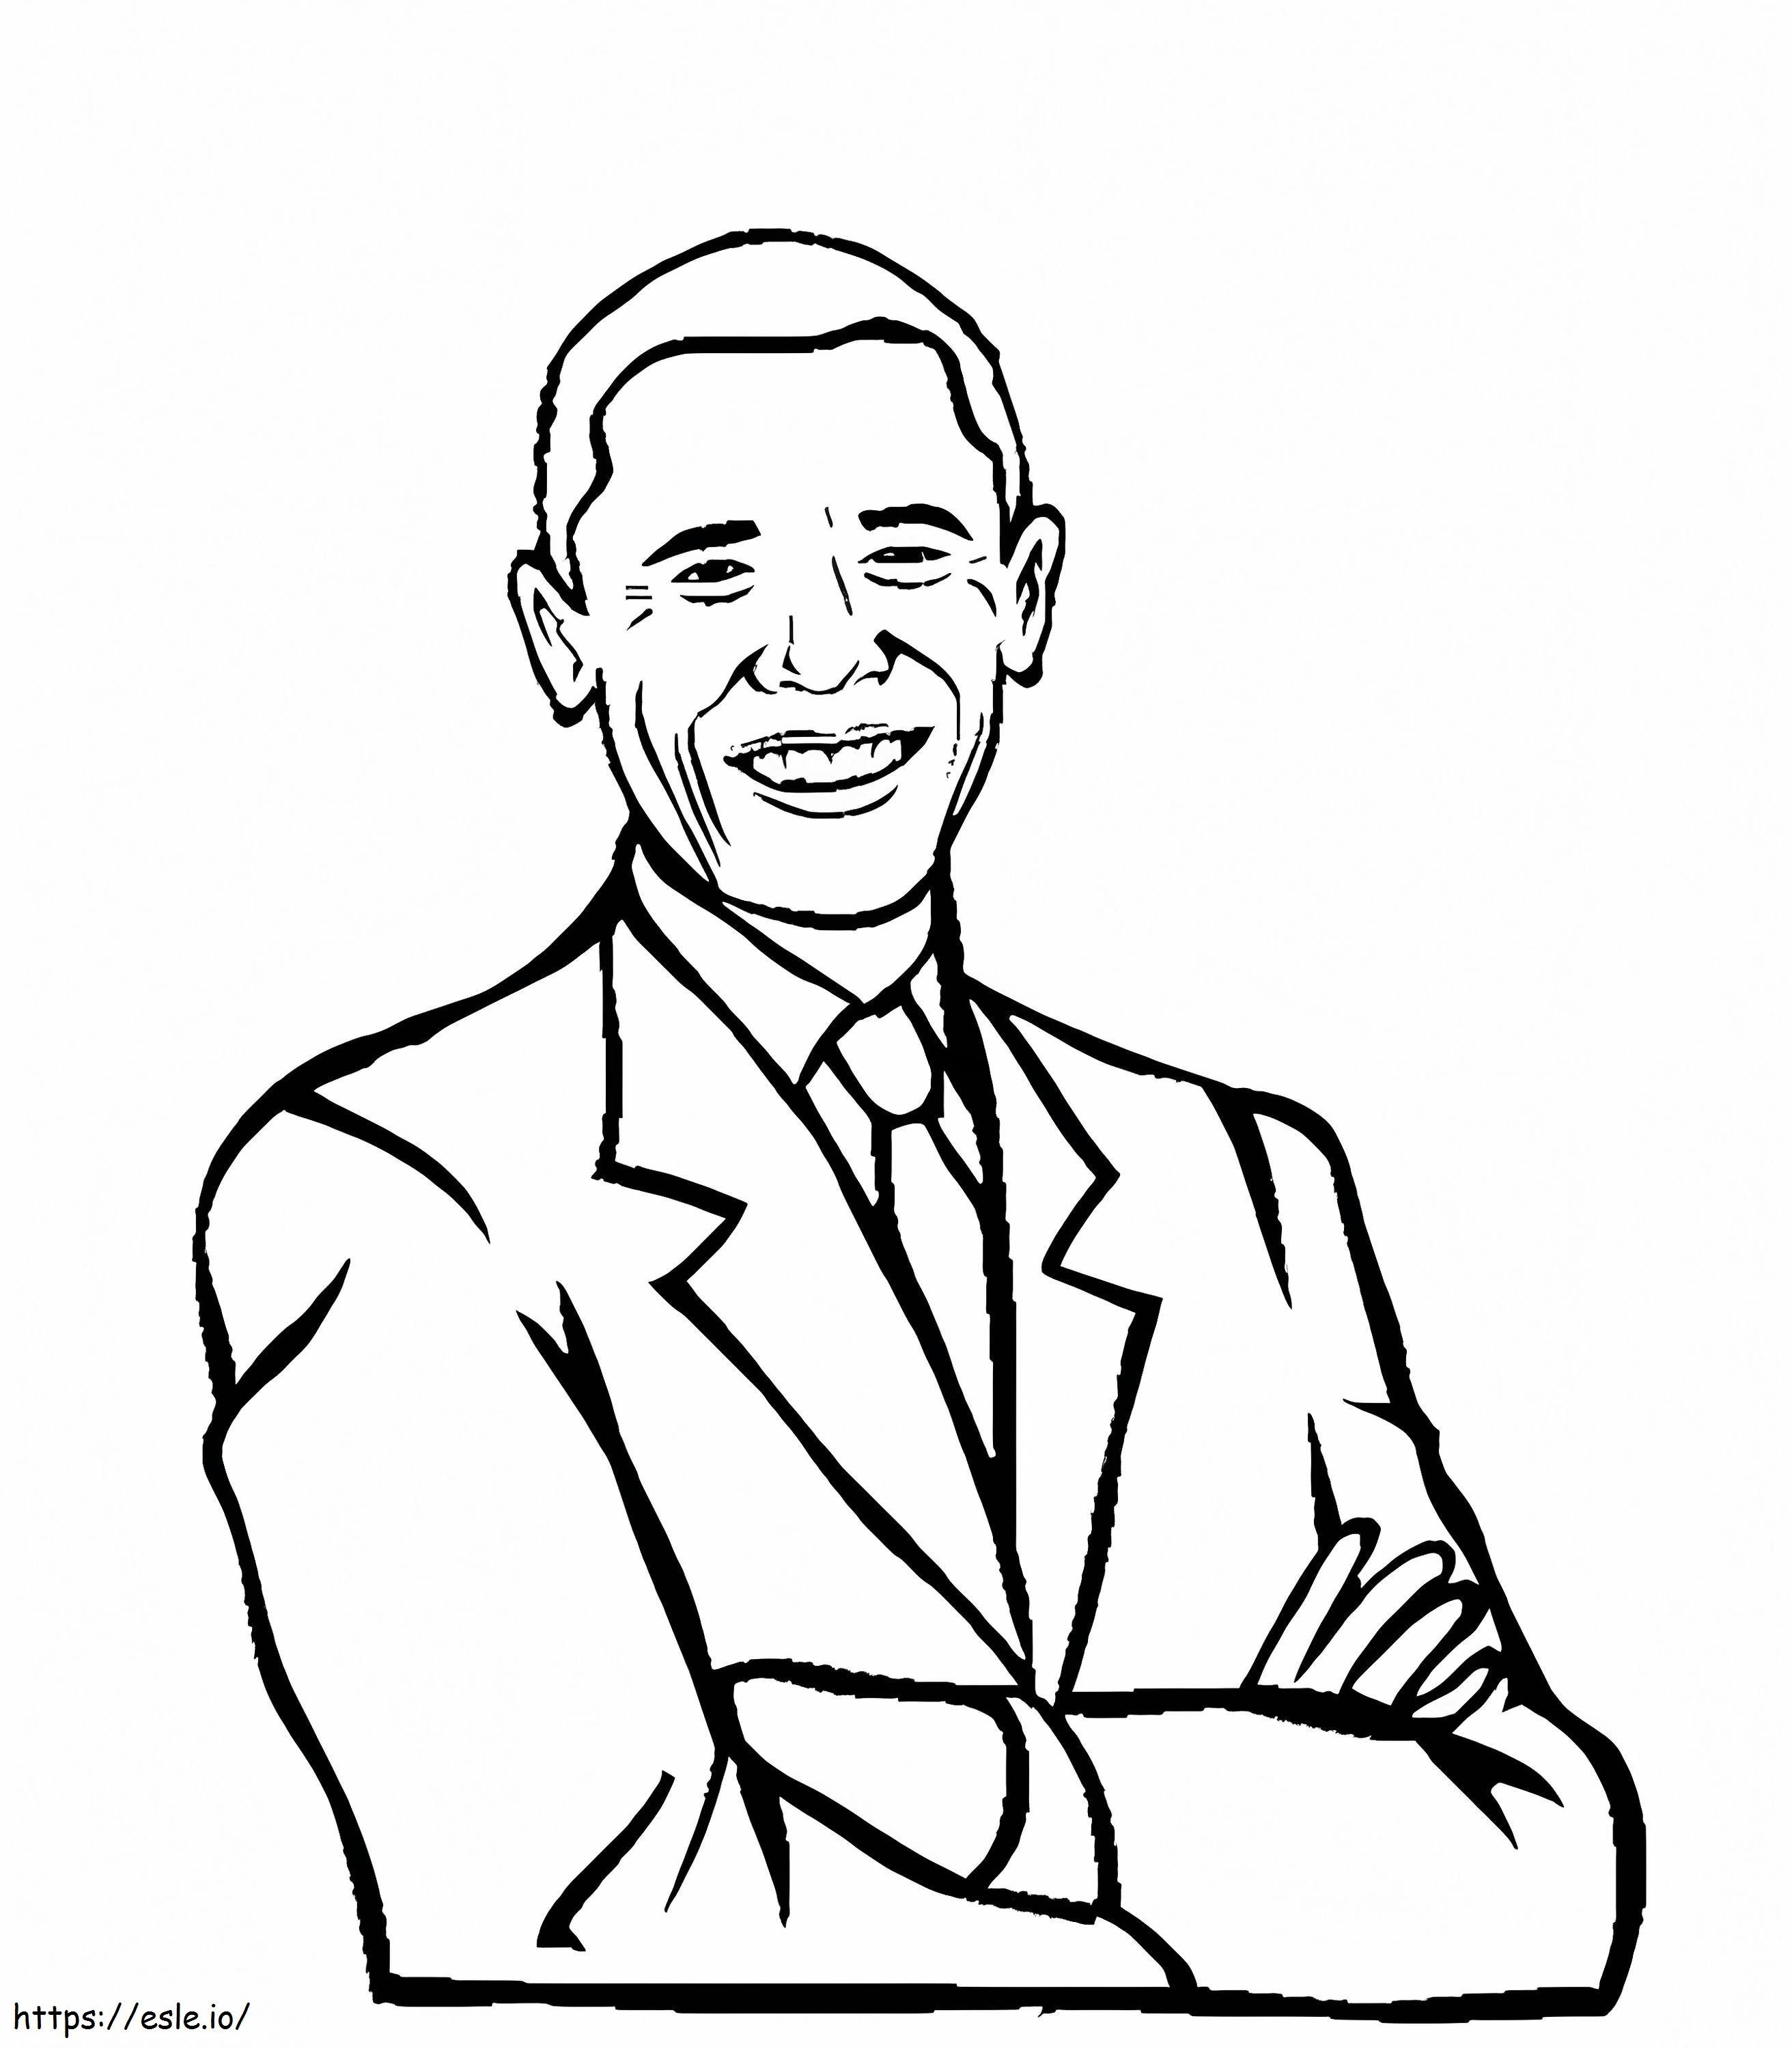 Funny Obama coloring page